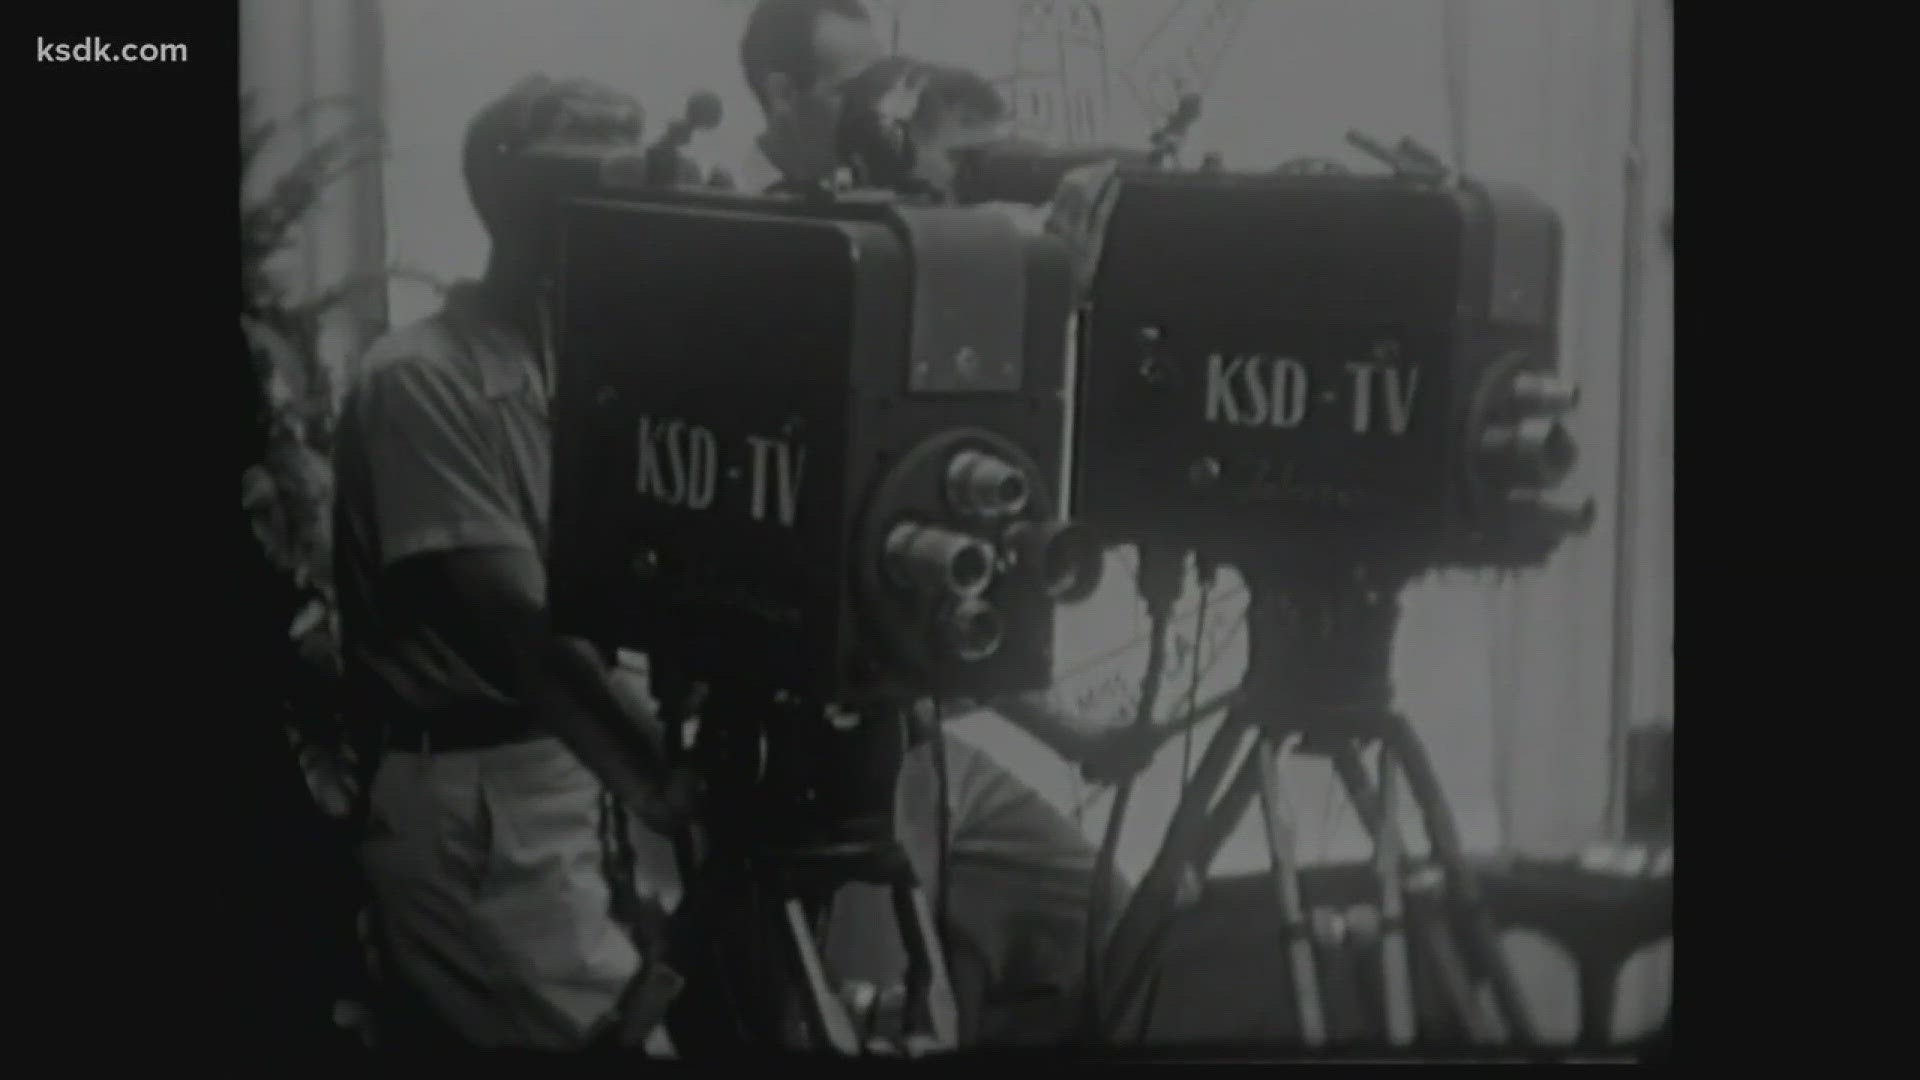 On this date in 1947, Channel 5, then known by the call letters KSD, became the 1st TV station to broadcast in St. Louis. We've been on your side ever since.